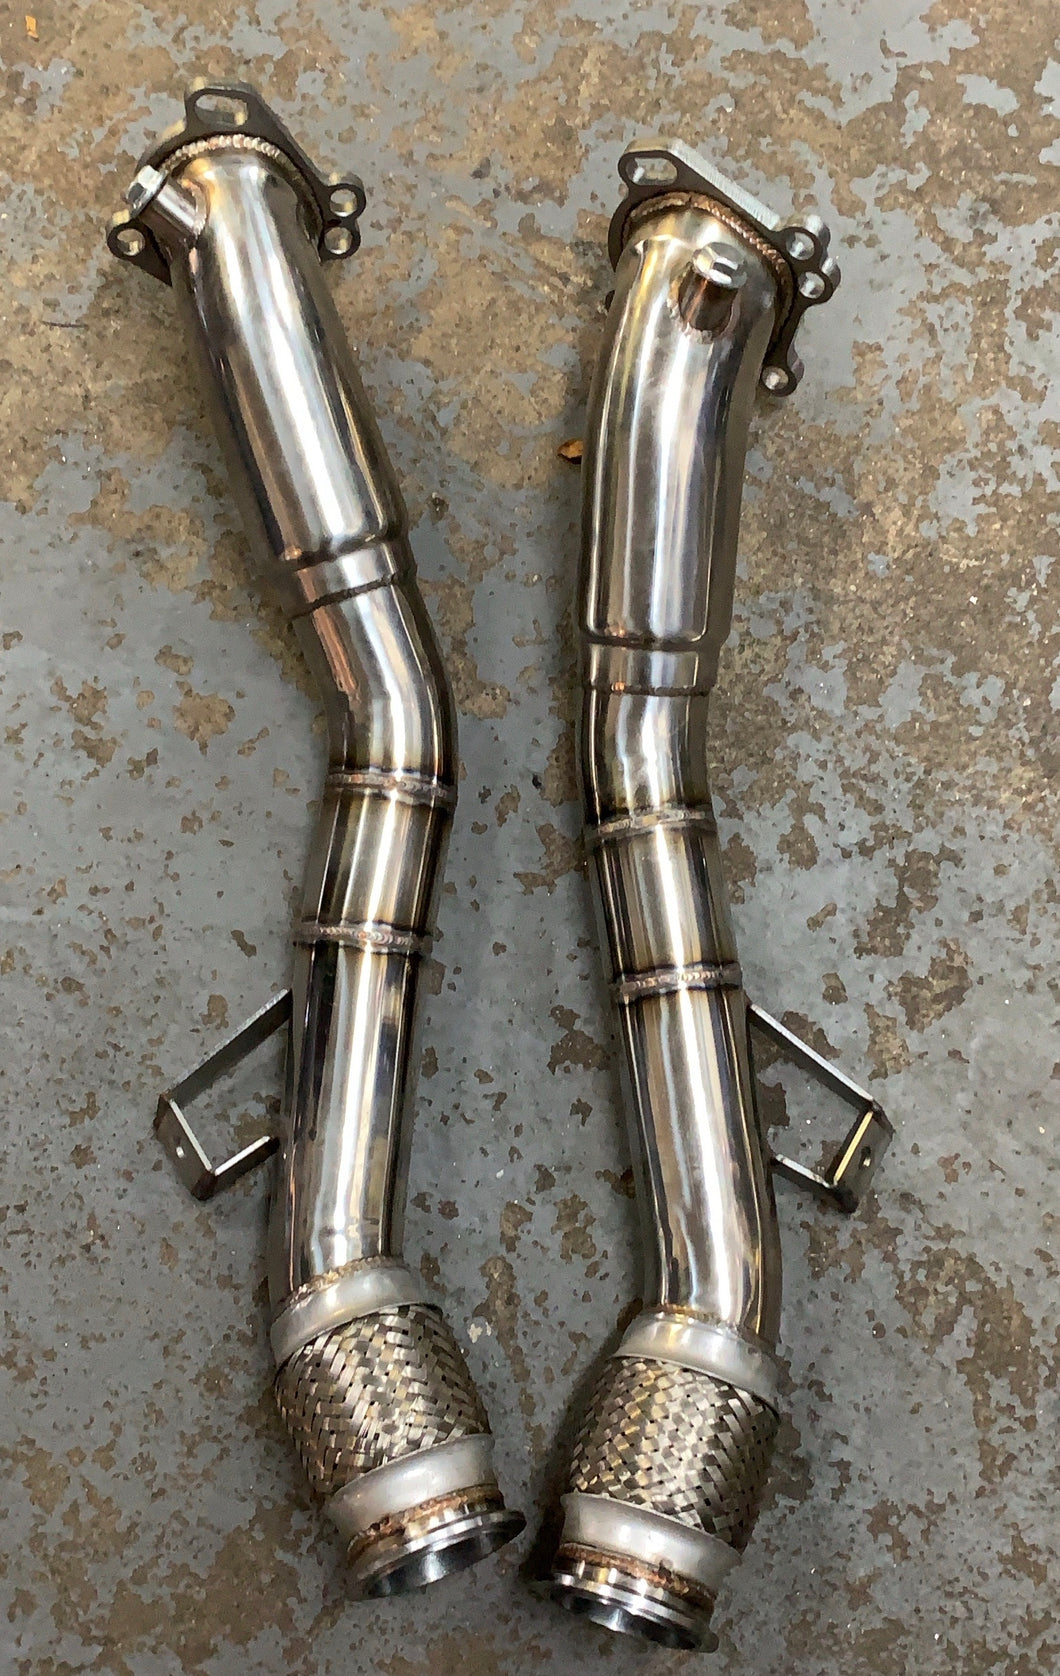 B6/b7 2.7t down pipe set for twin turbo application